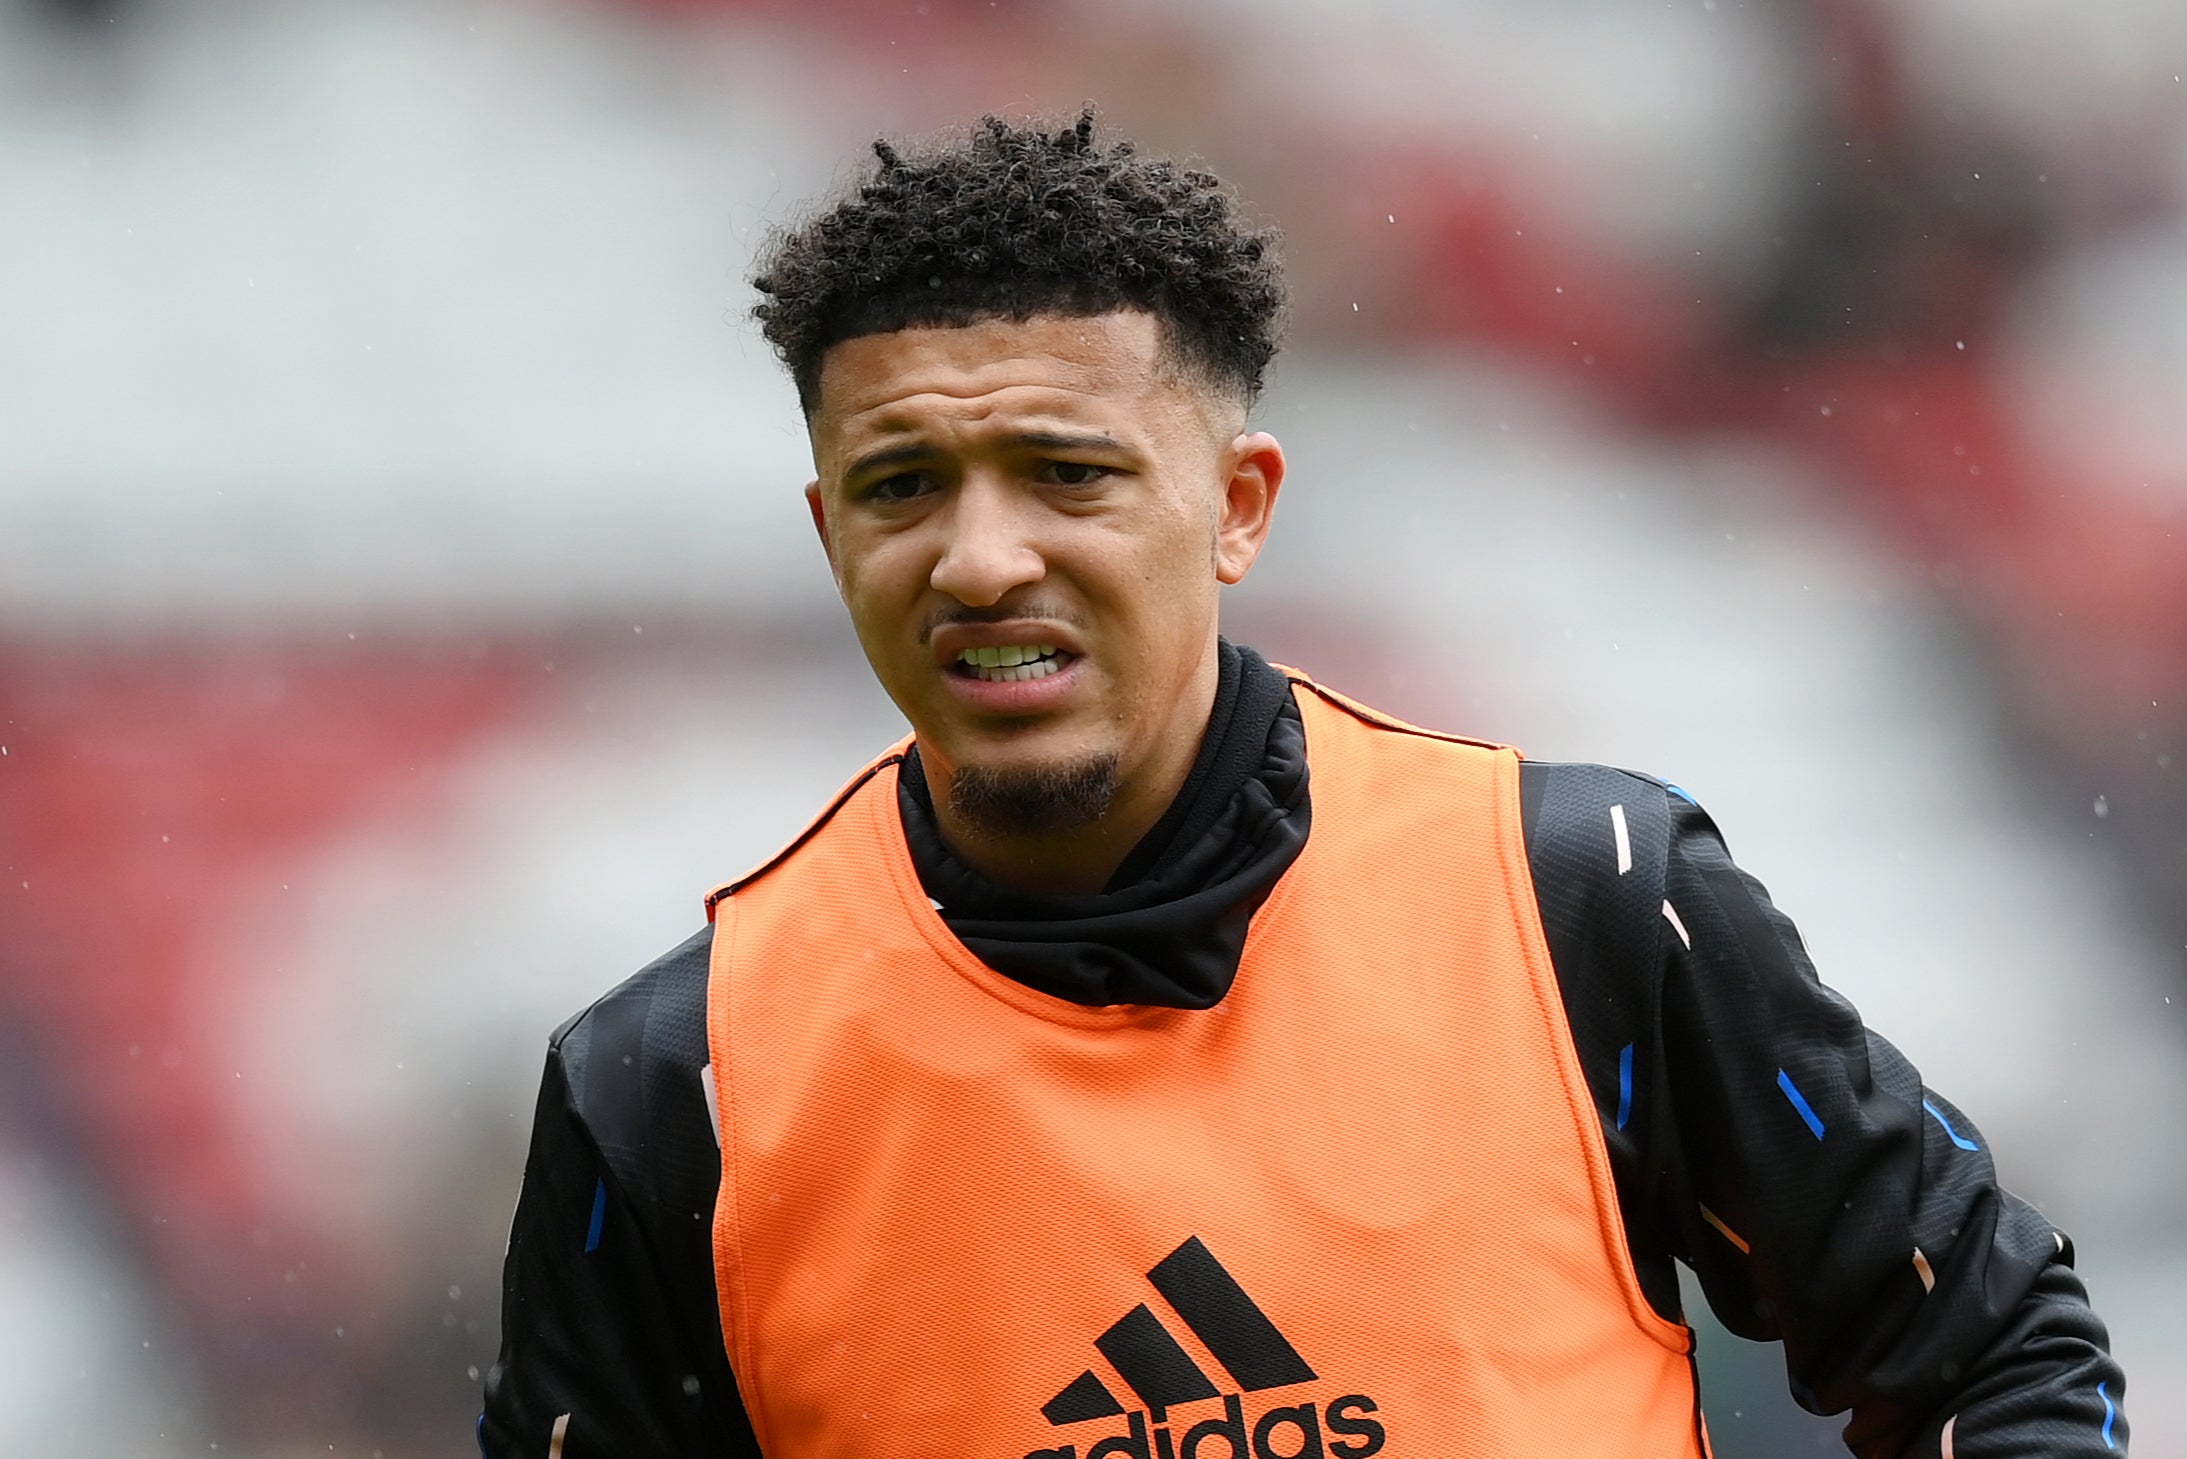 Jadon Sancho has struggled to adapt on the right wing for Man United